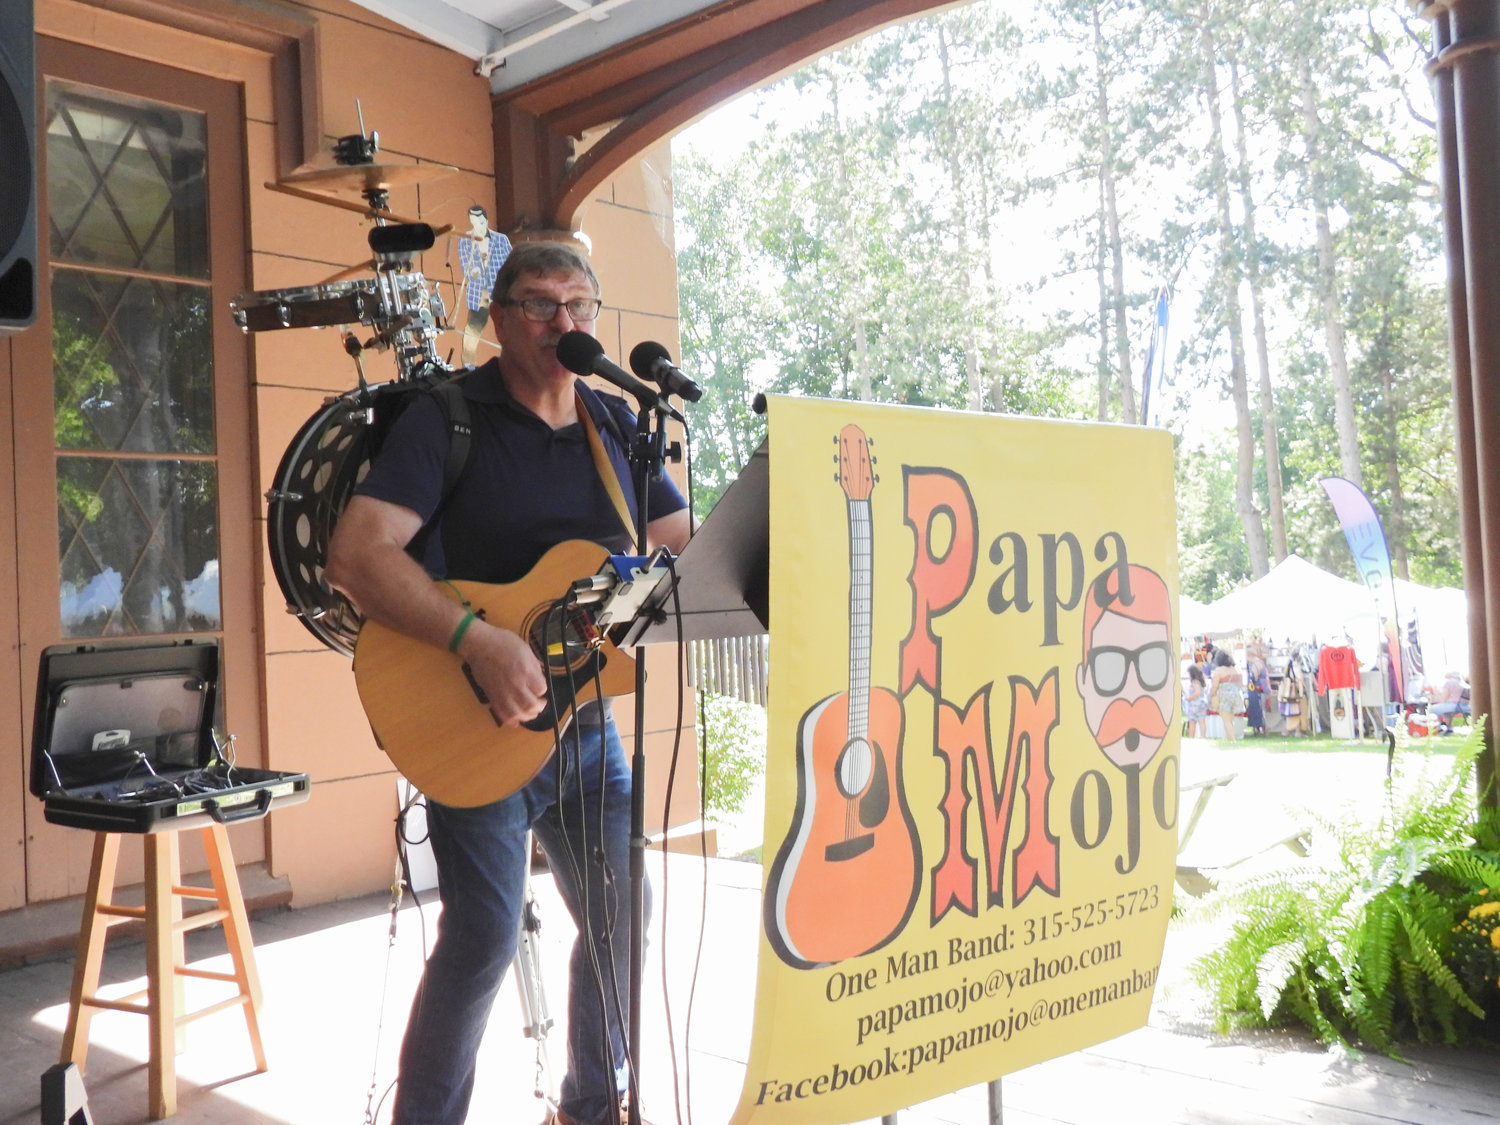 The 58th Annual Madison County Craft Festival saw artisans of every craft under the sun selling their wares at the Madison County Historical Society in Oneida on Saturday, Sept. 10. Papa Mojo, the One Man Band, plays at the Festival.